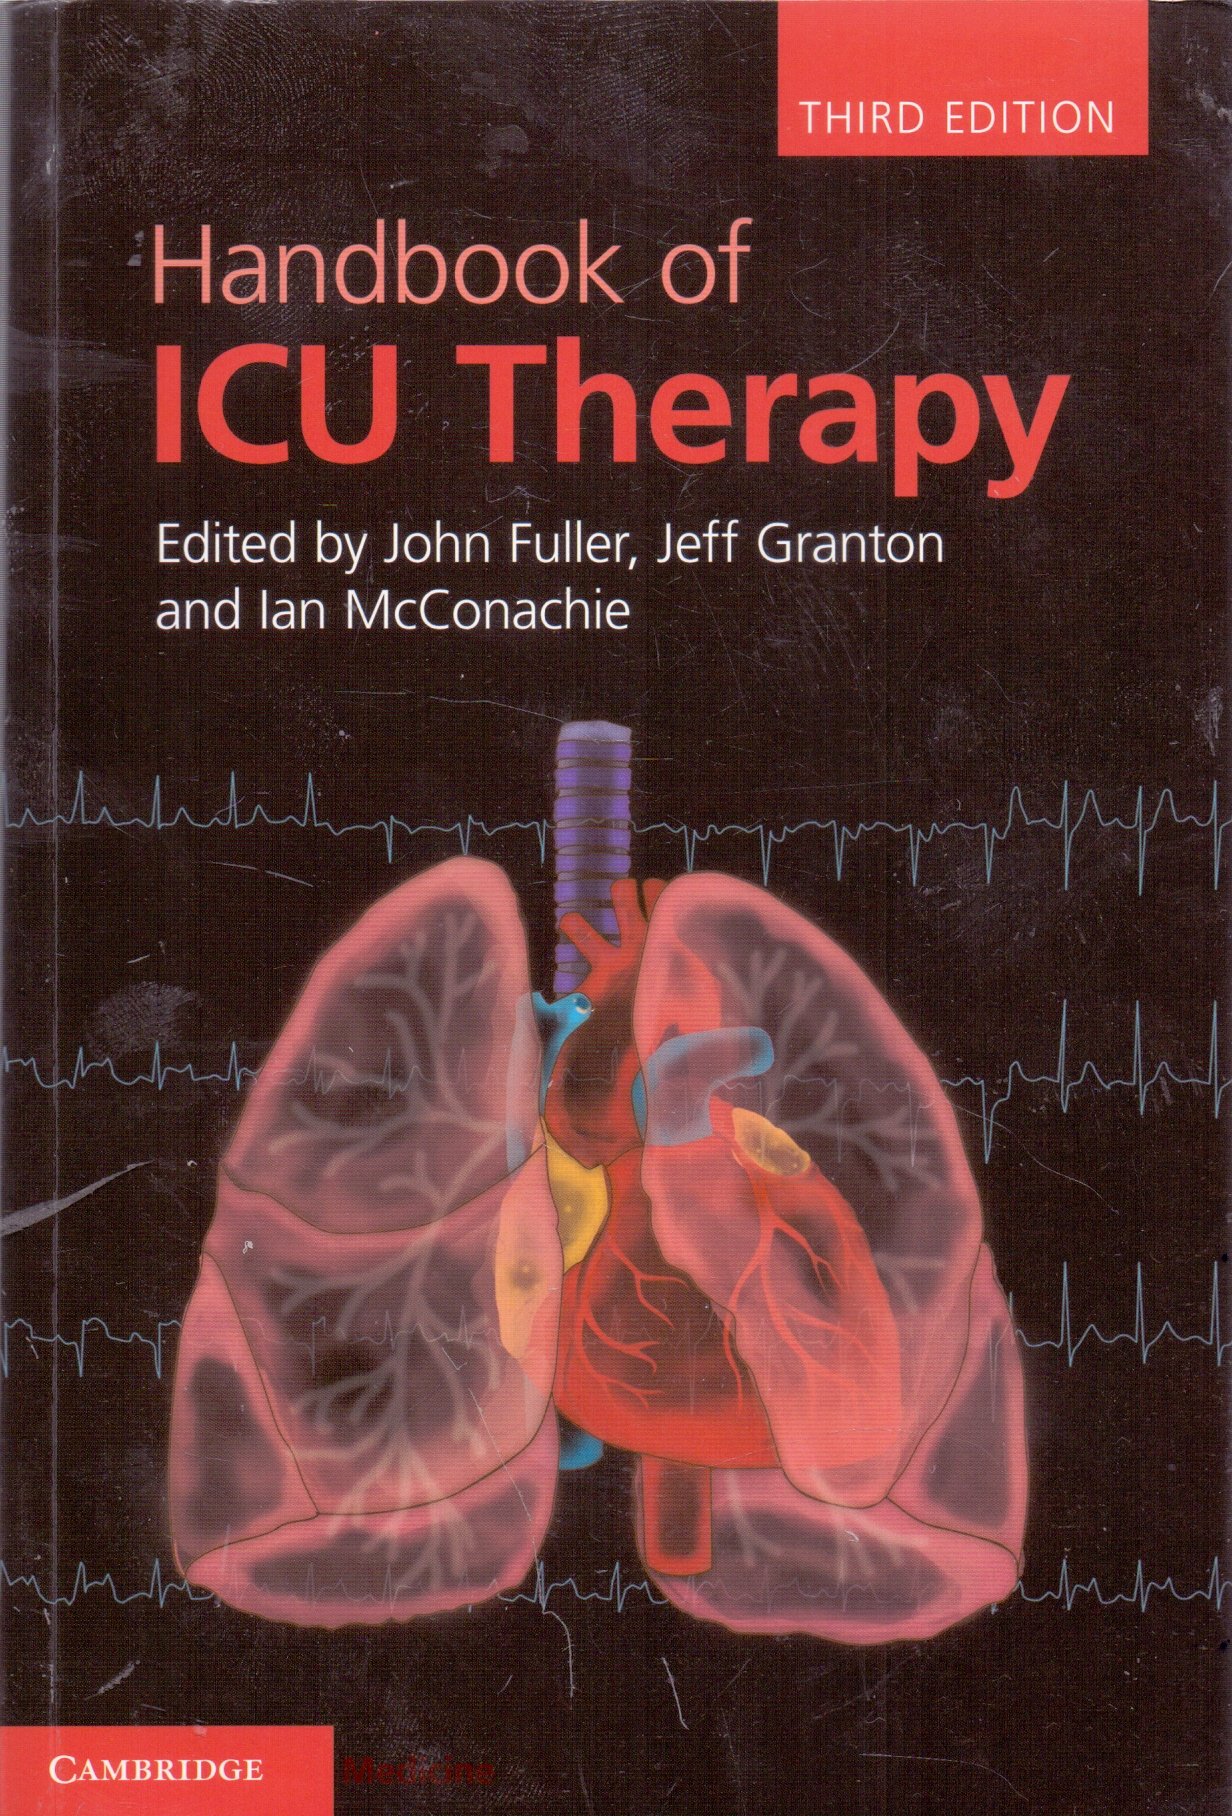 Handbook of ICU Therapy 3rd Edition 2015 